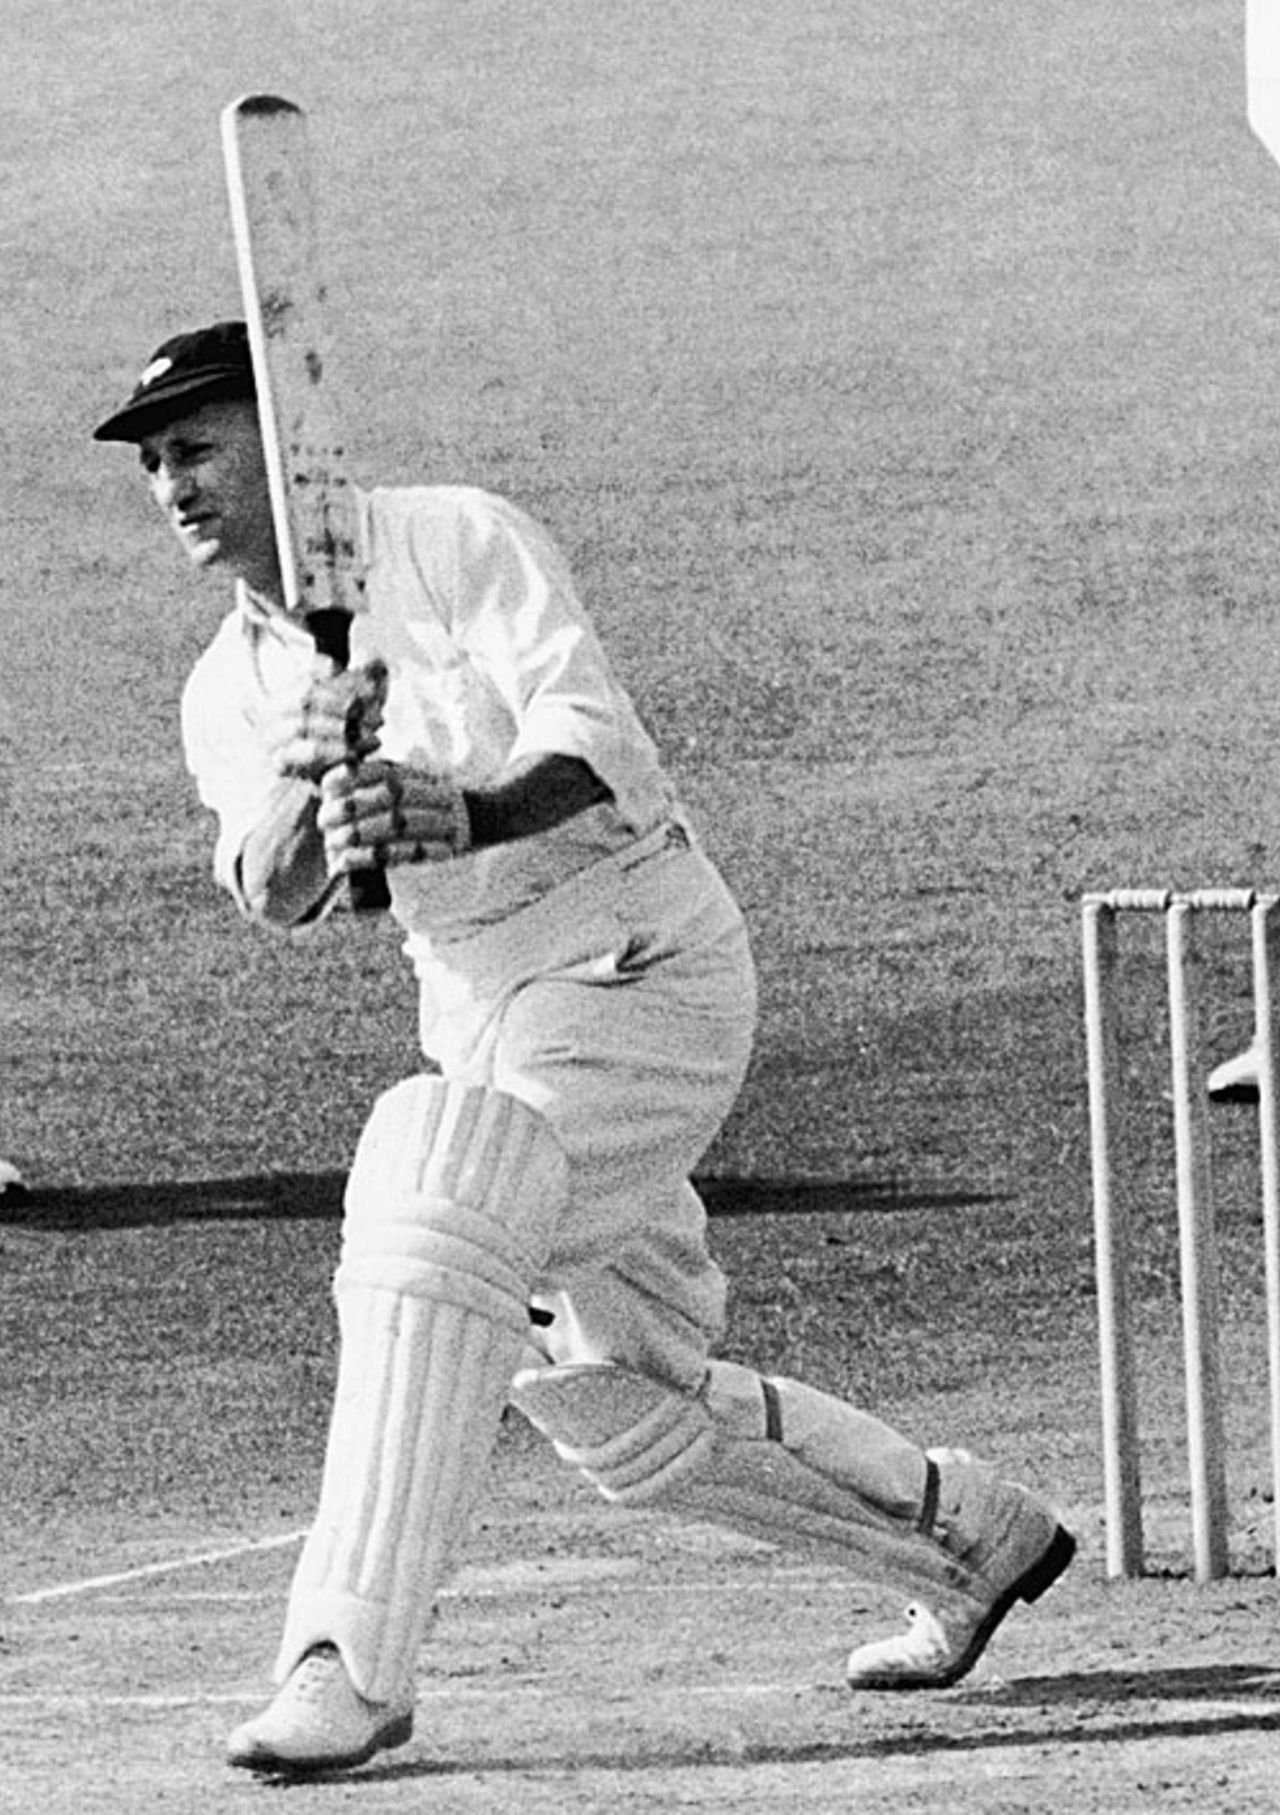 Len Hutton drives on the off side, 1950